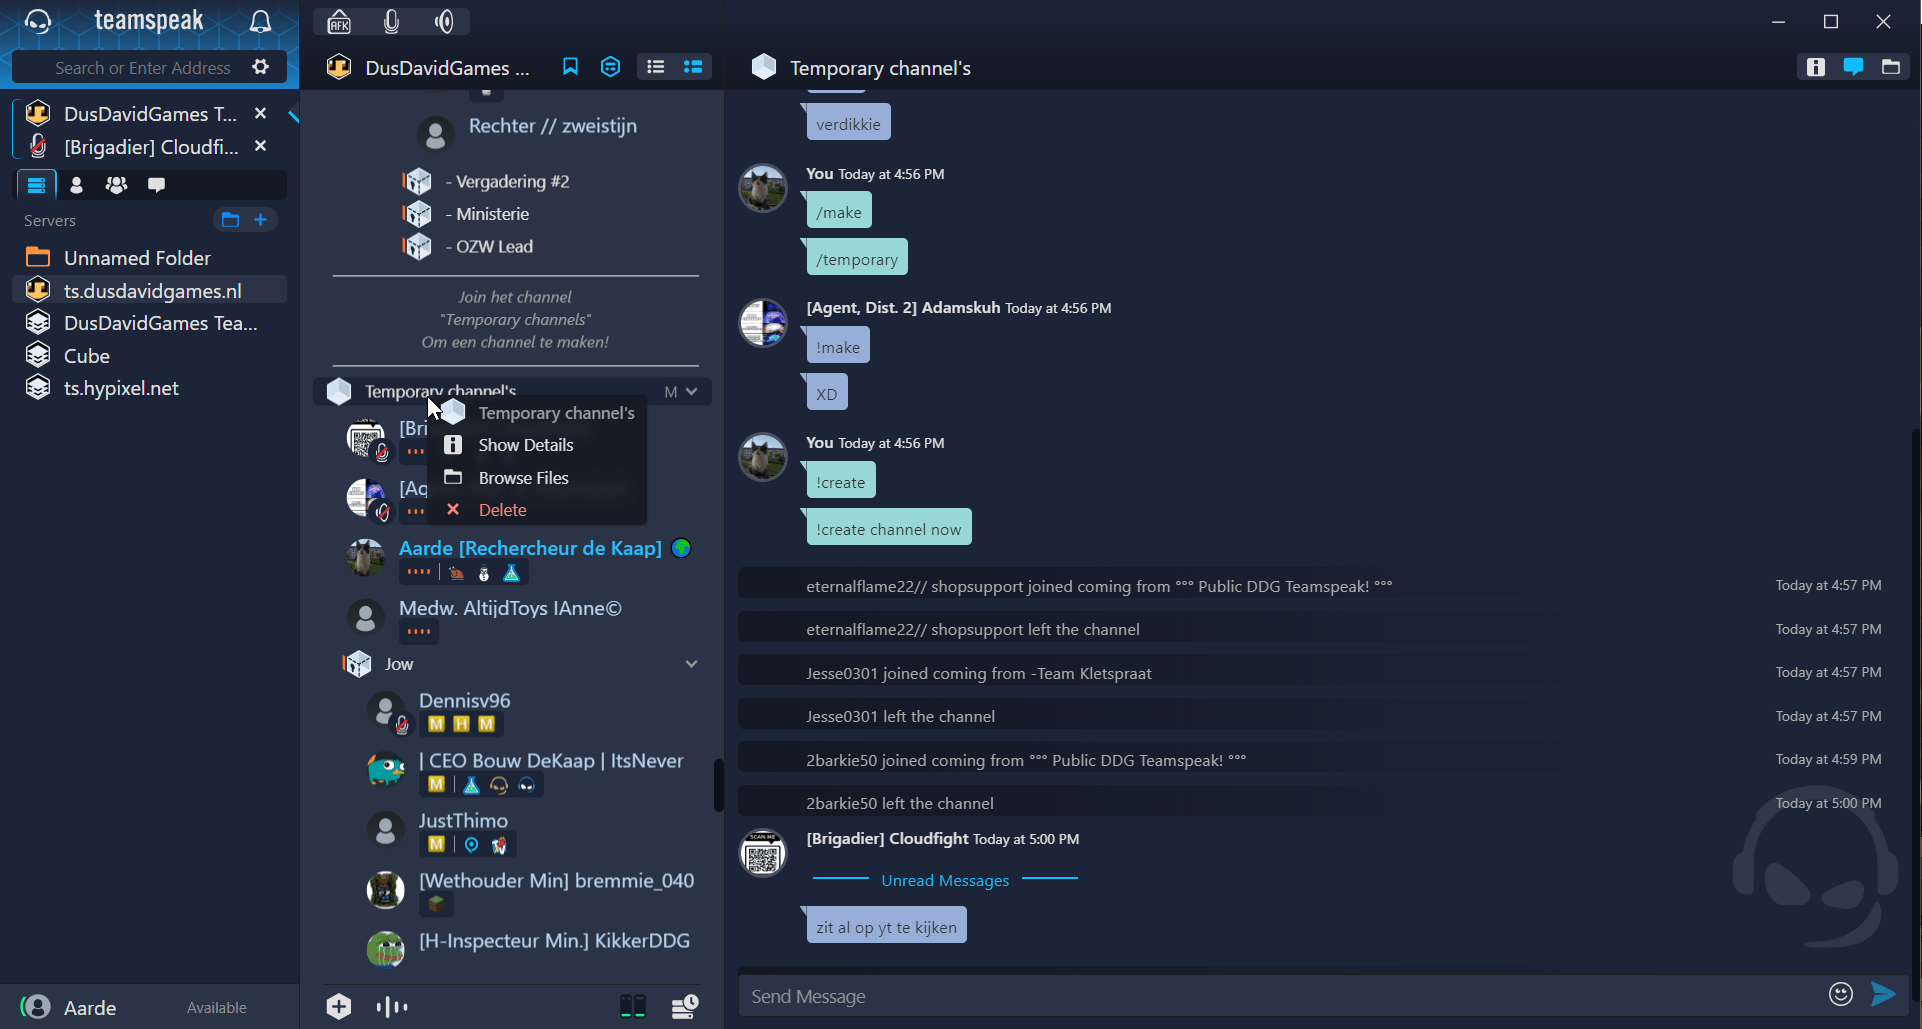 TeamSpeak app user interface showing available servers and group chat